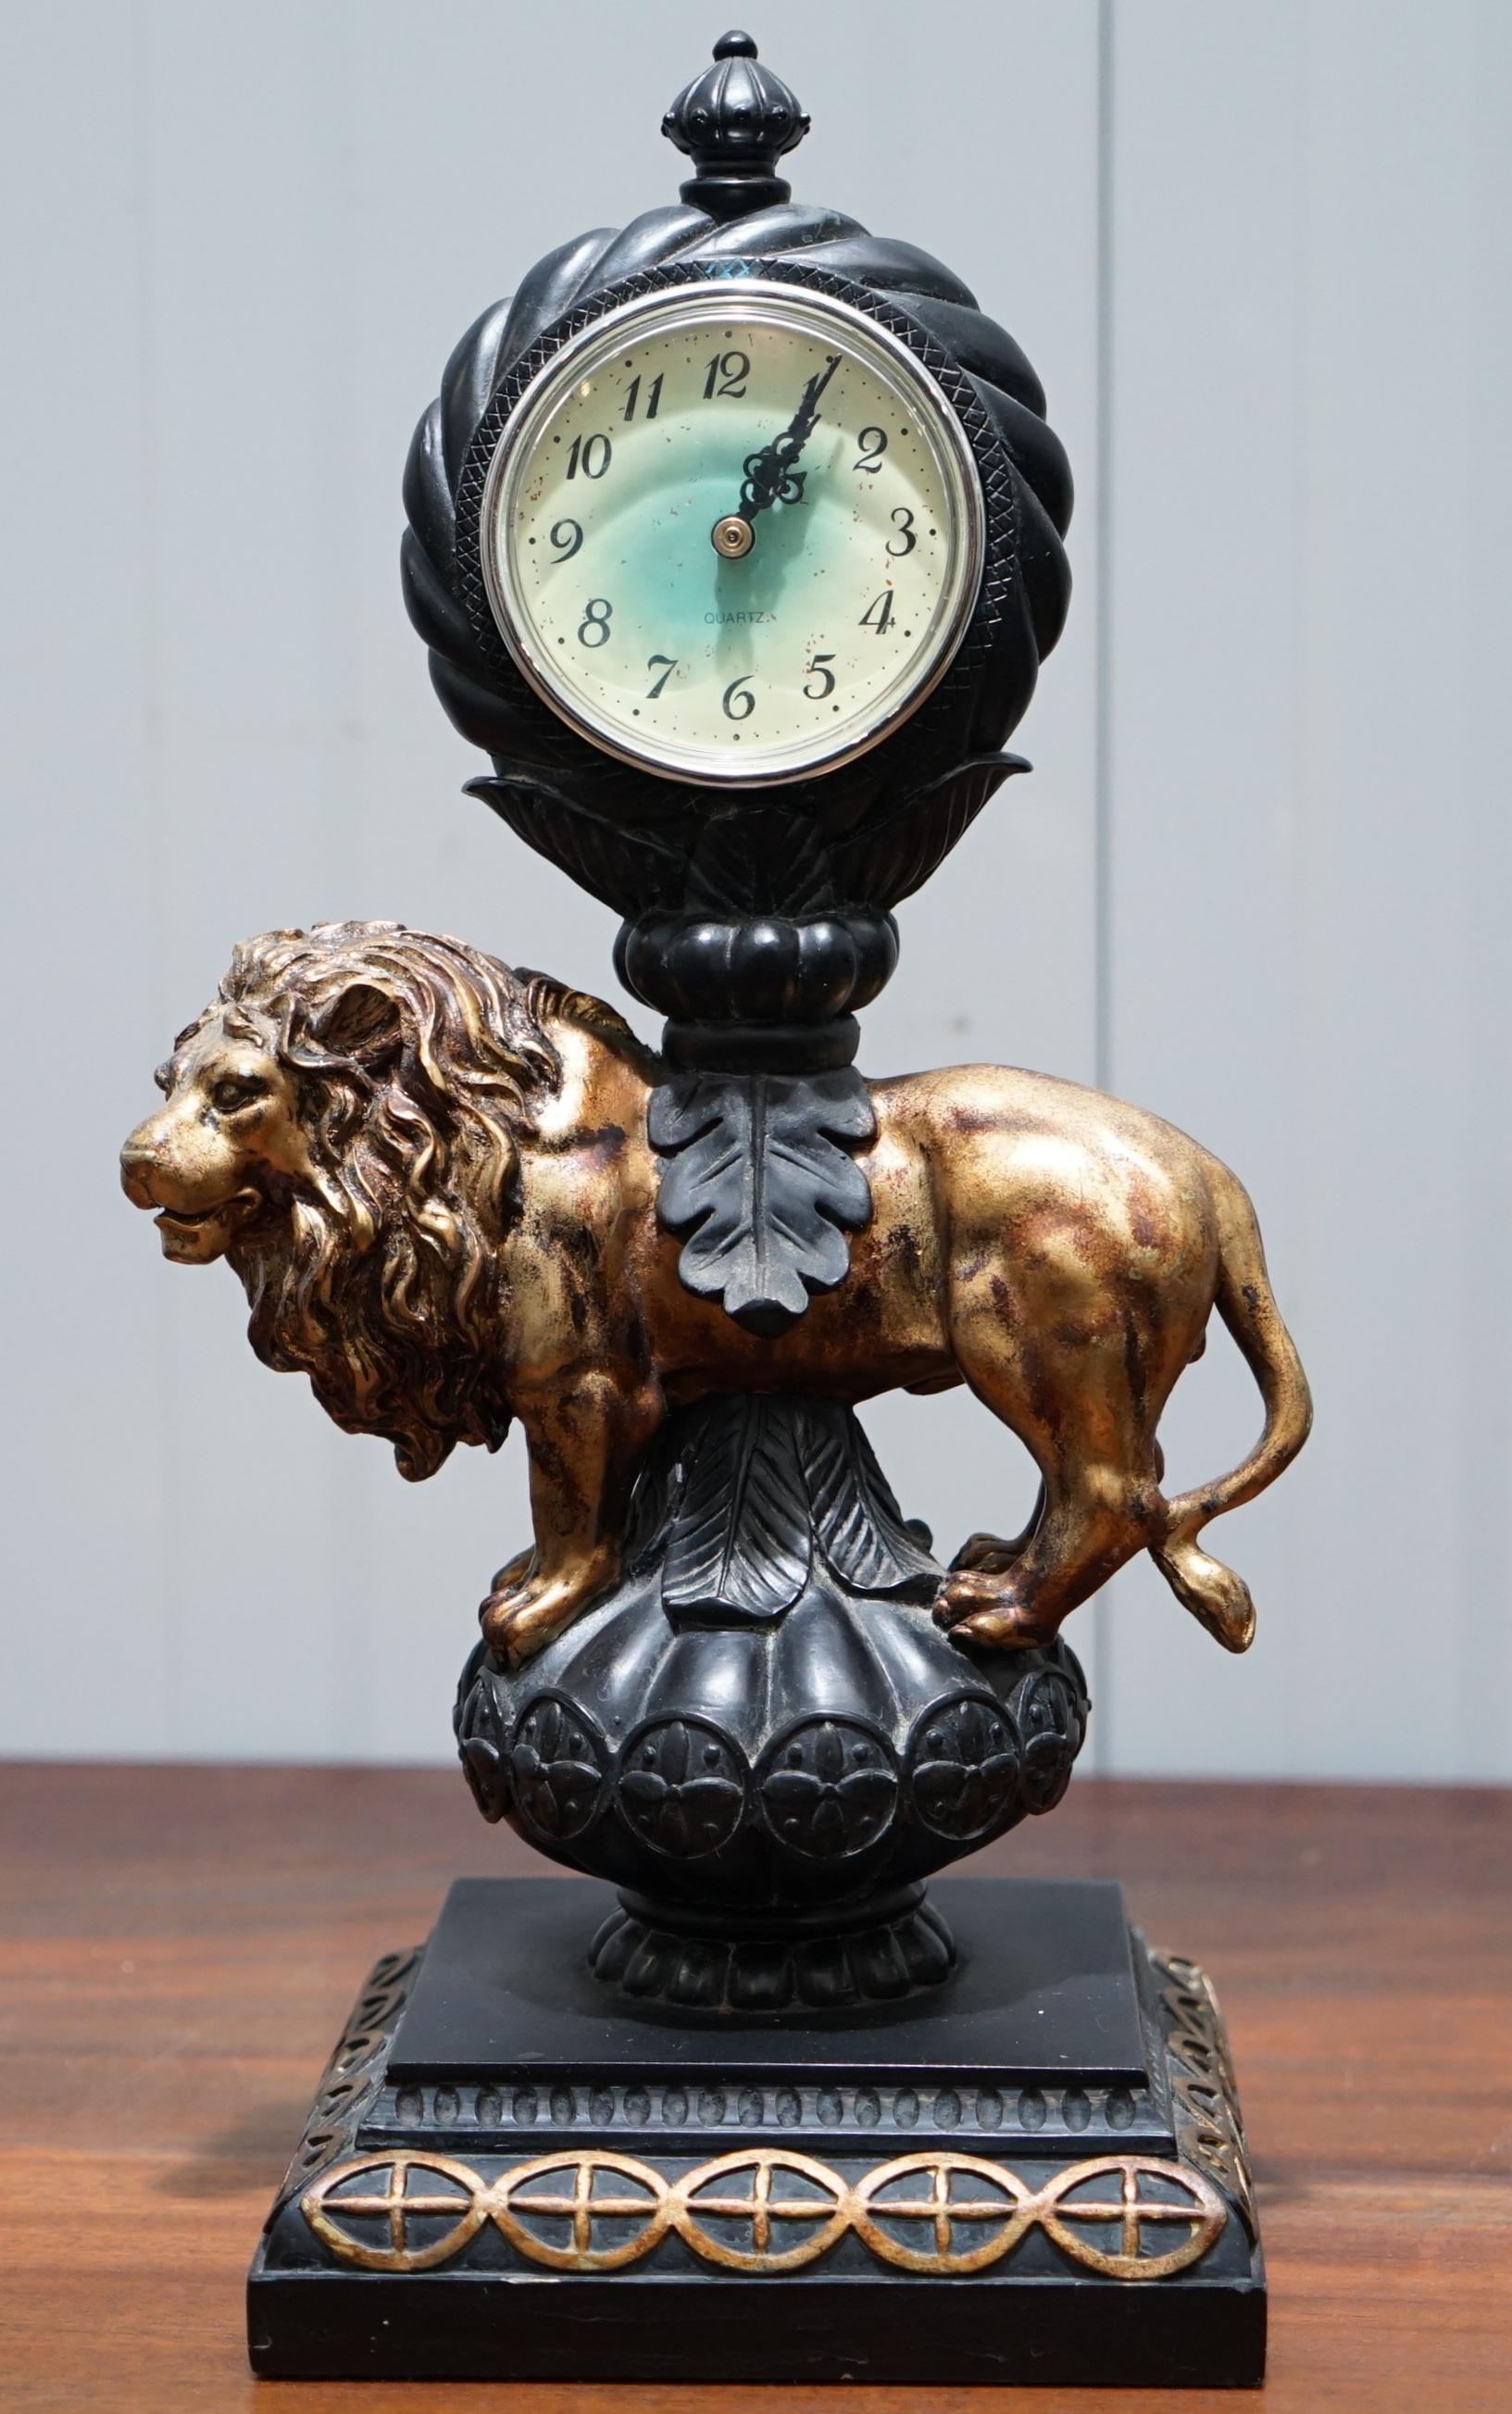 We are delighted to offer for sale this nice decorative mantle clock of a very regal looking Lion 

A very lovely ornate clock, the movement is a modern digital piece 

There's a lot of high-end detail with this clock as you can see

This